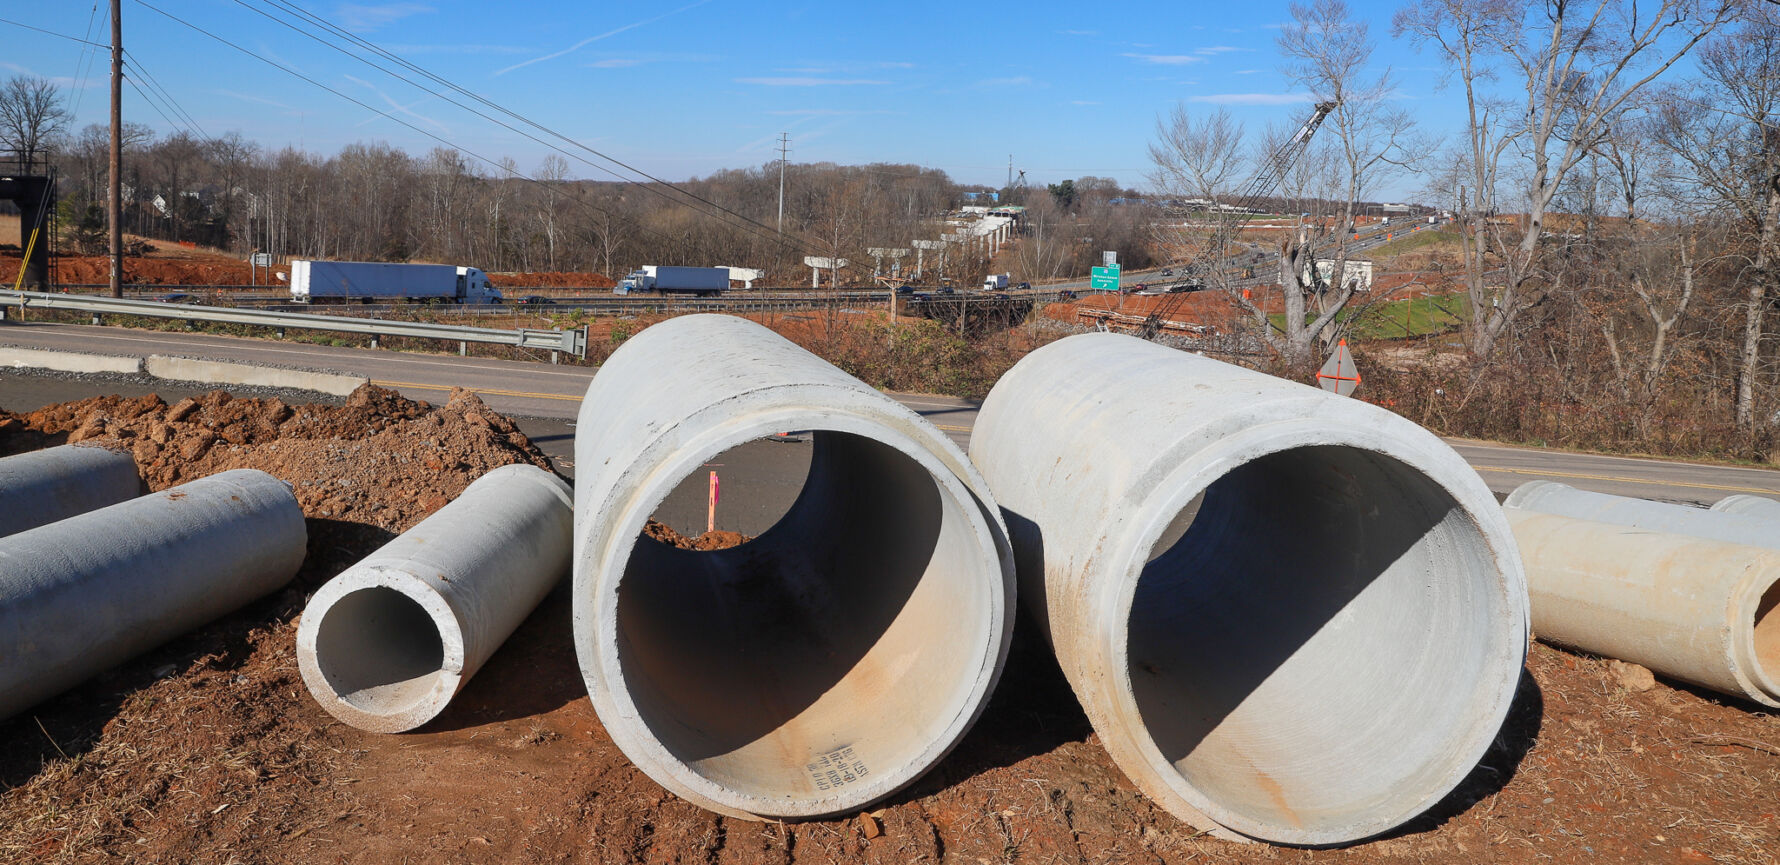 Interstates 77 & 40 Interchange Expansion in Statesville, NC featuring Johnson Concrete Products Reinforced Concrete Pipe